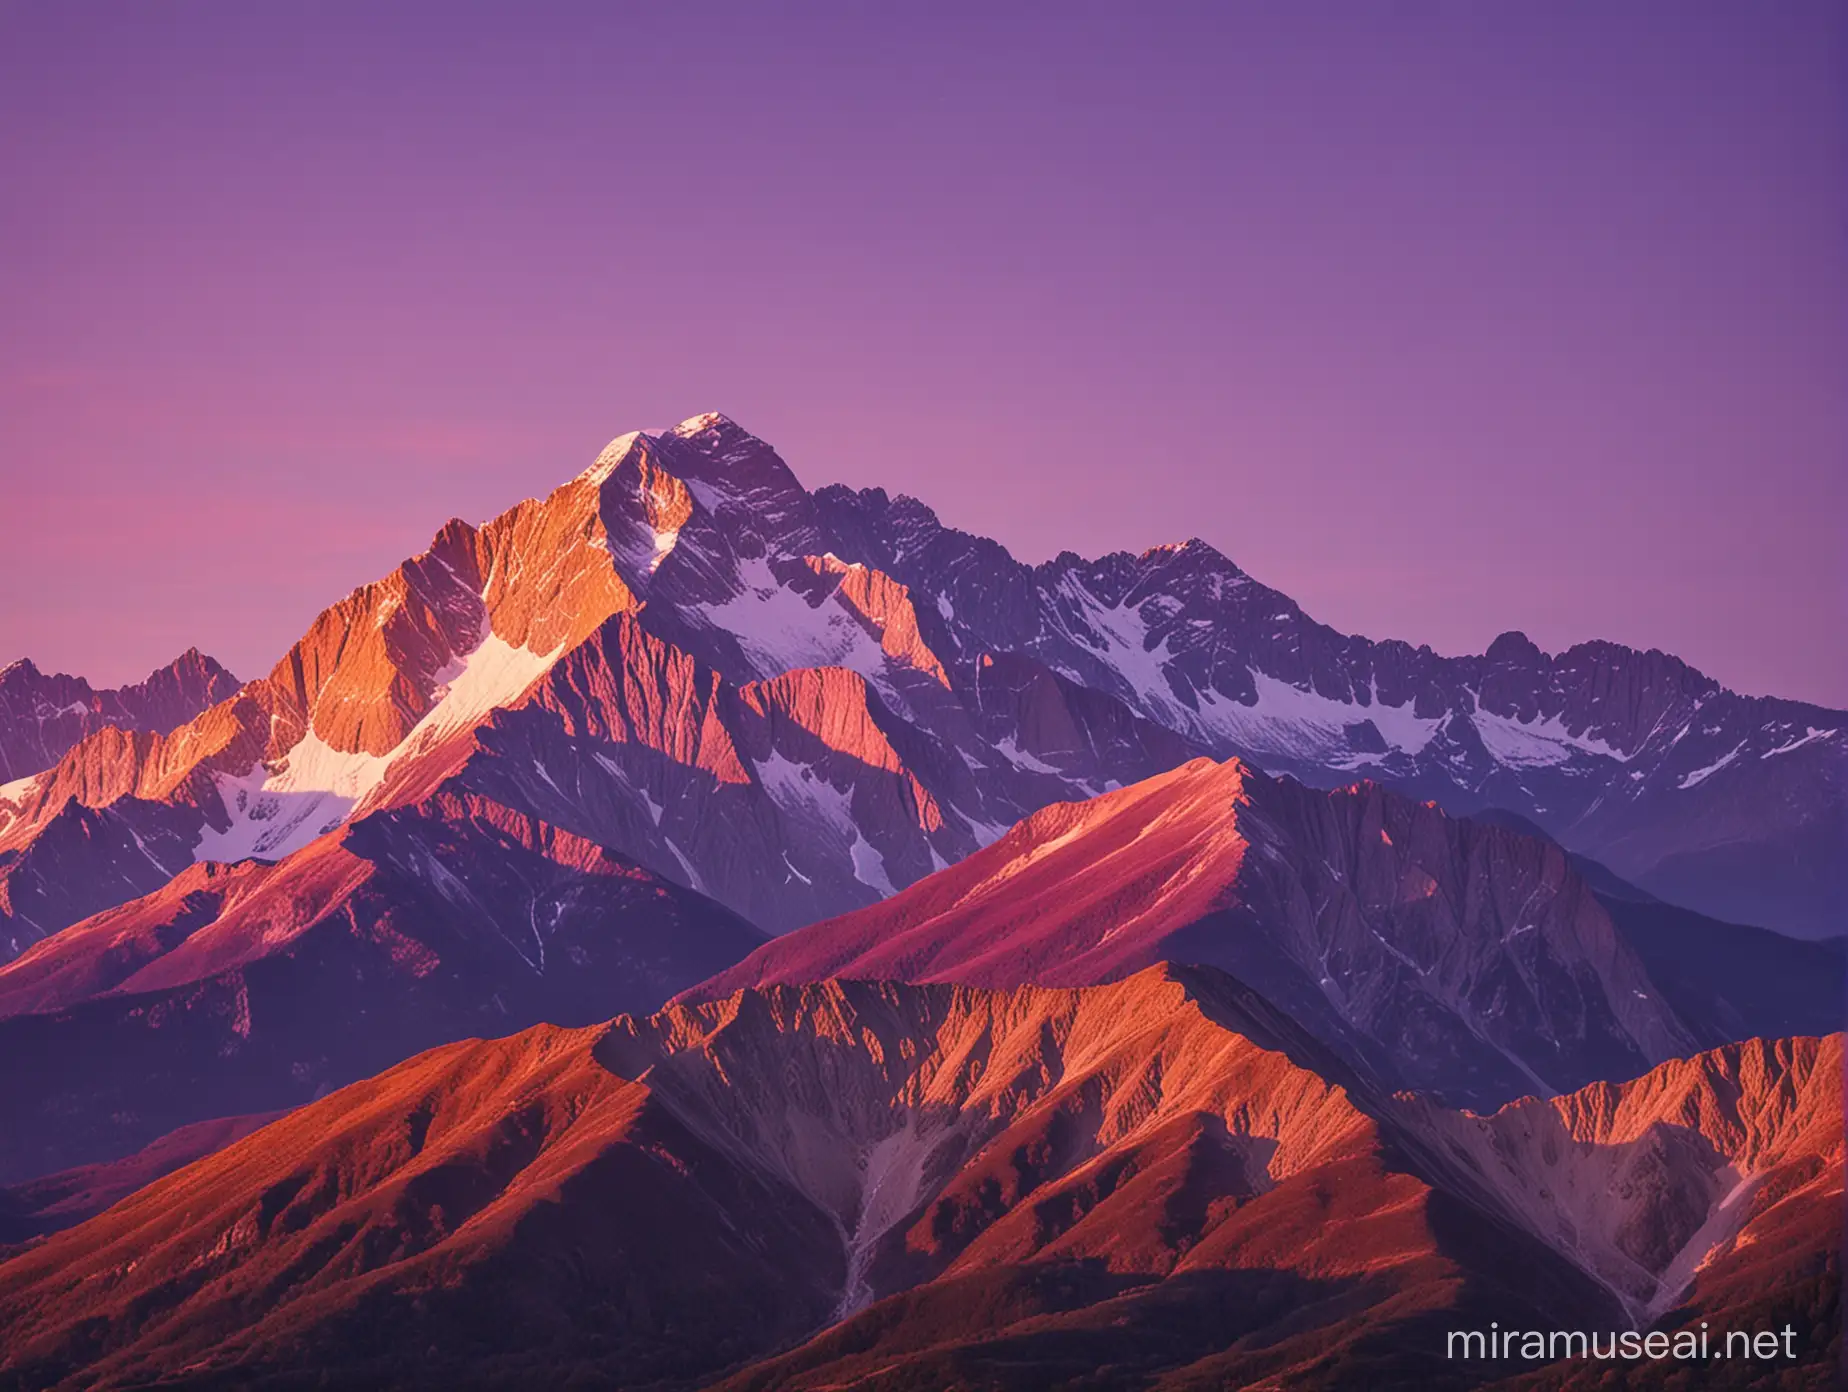 mountainrange during sunset, the sky vibrant colours purple, gold, pink, the mountains looking purple